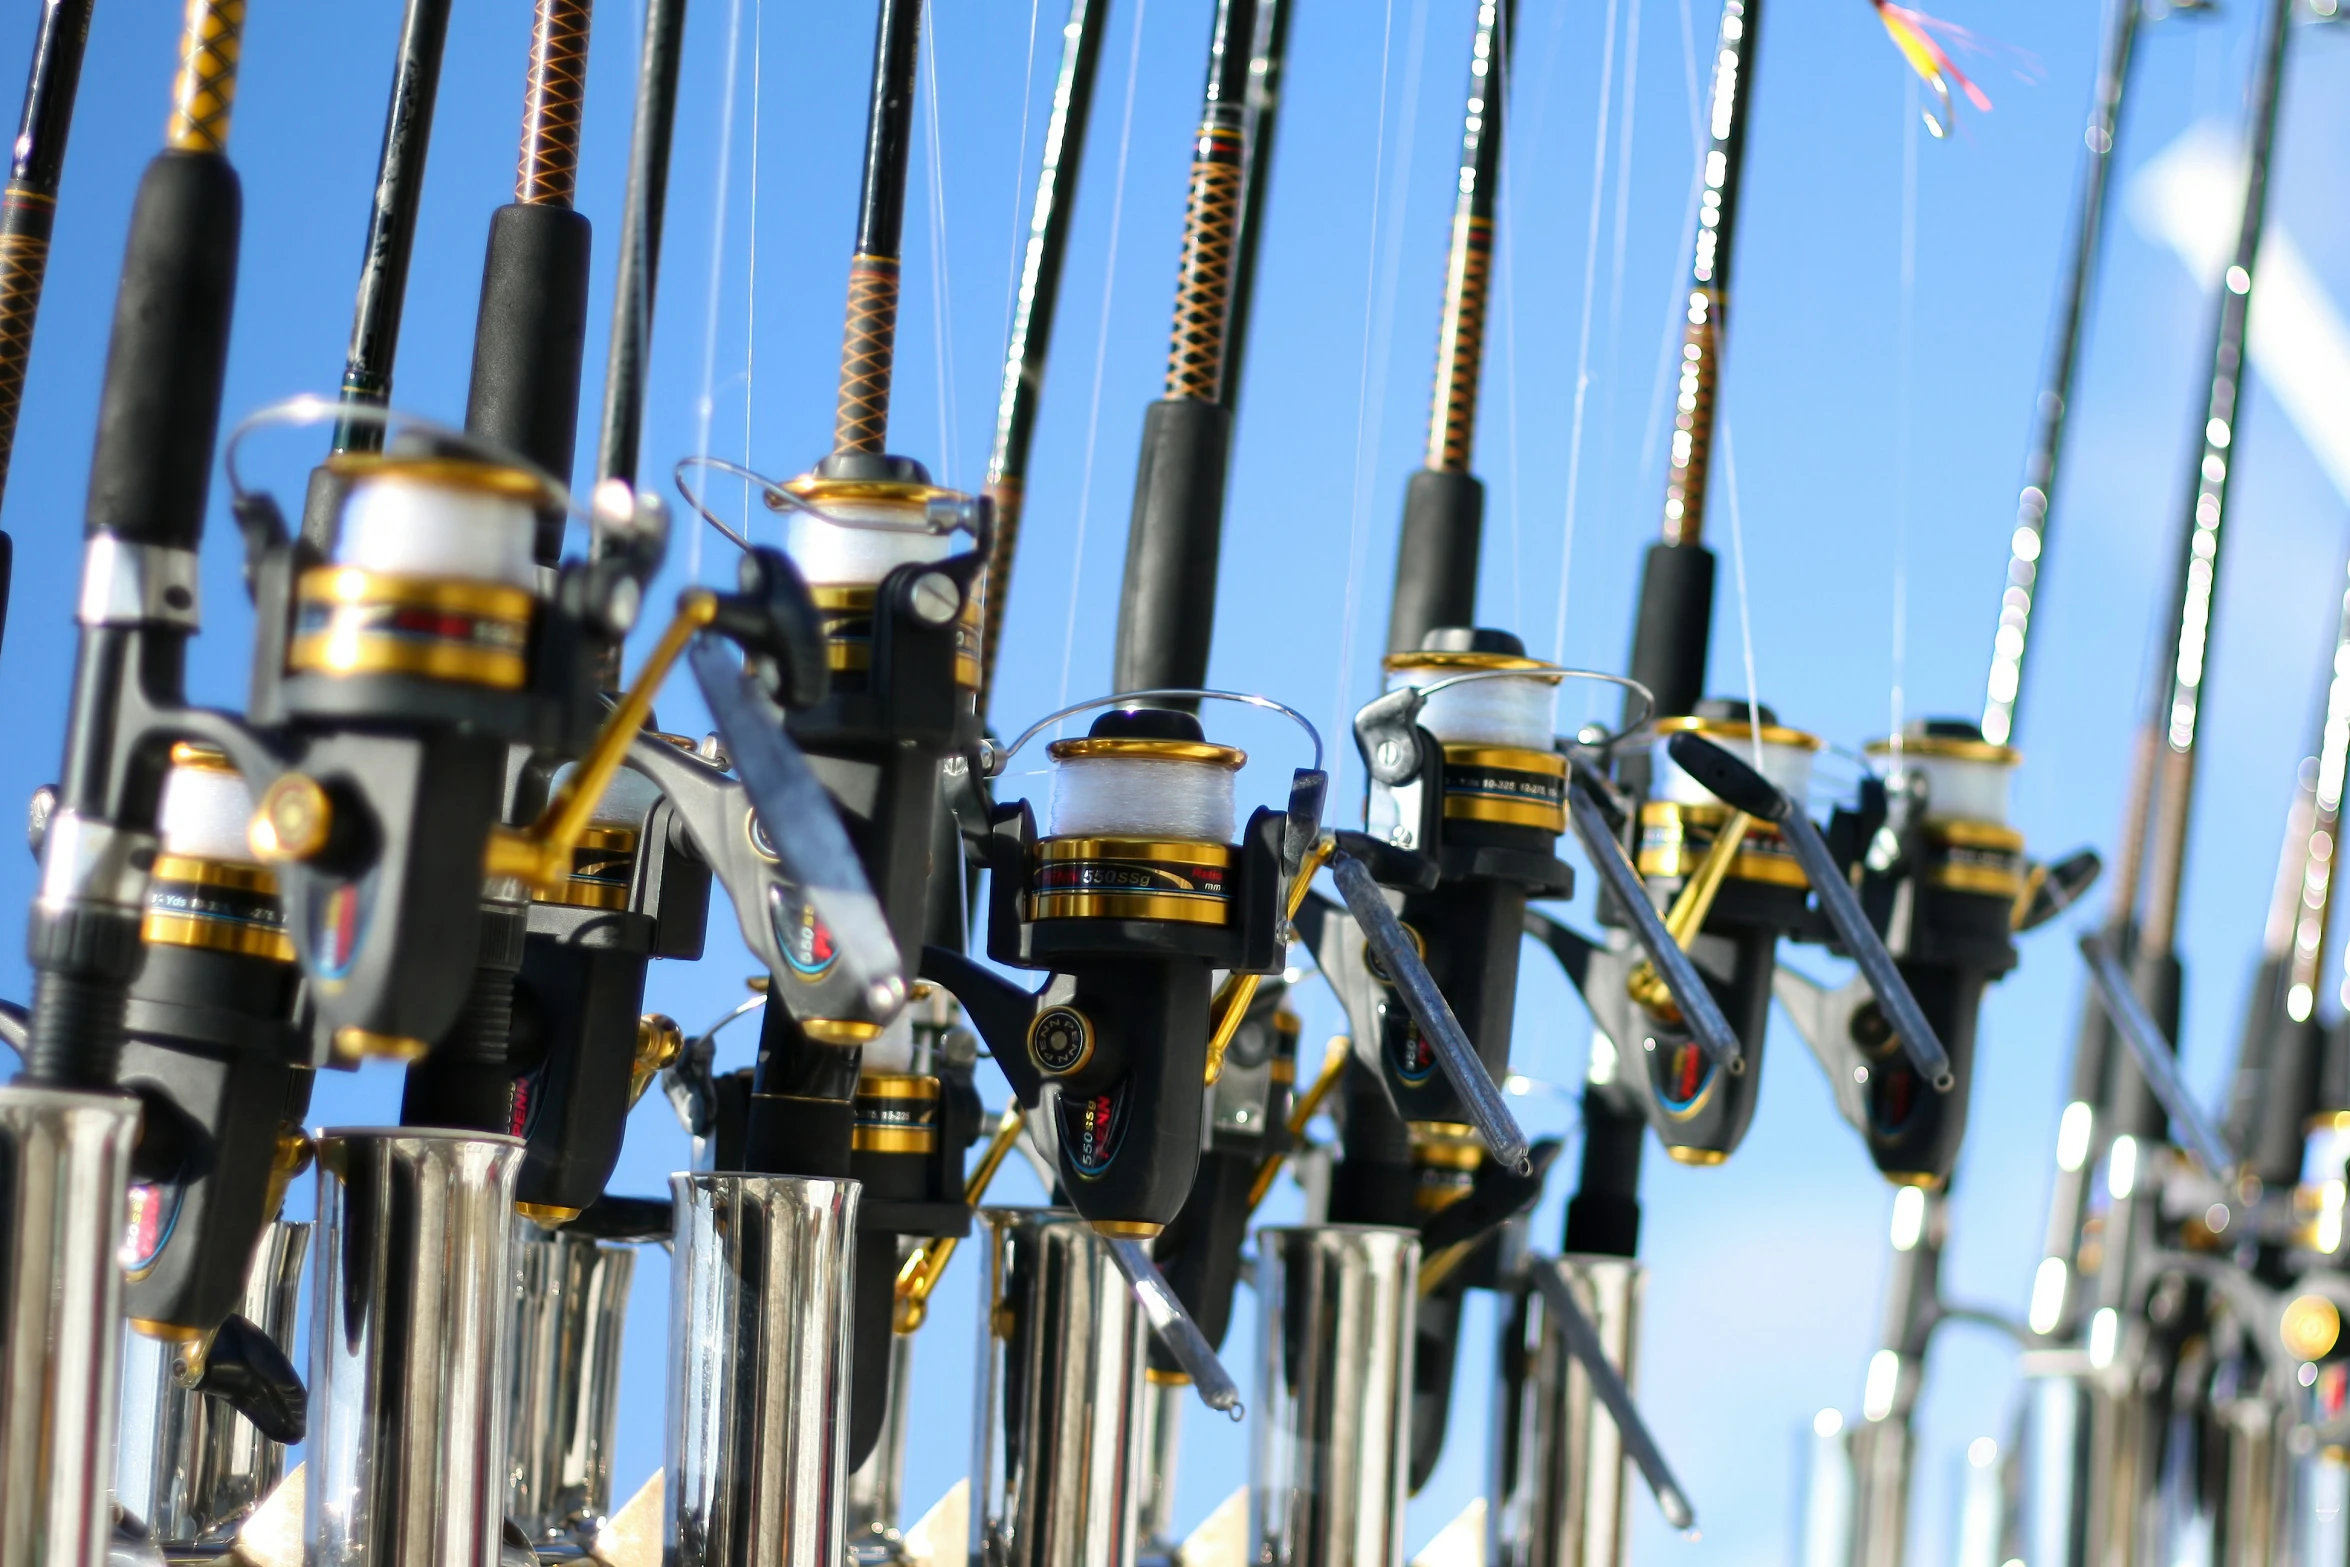 fishing rods connected to each other under blue skies